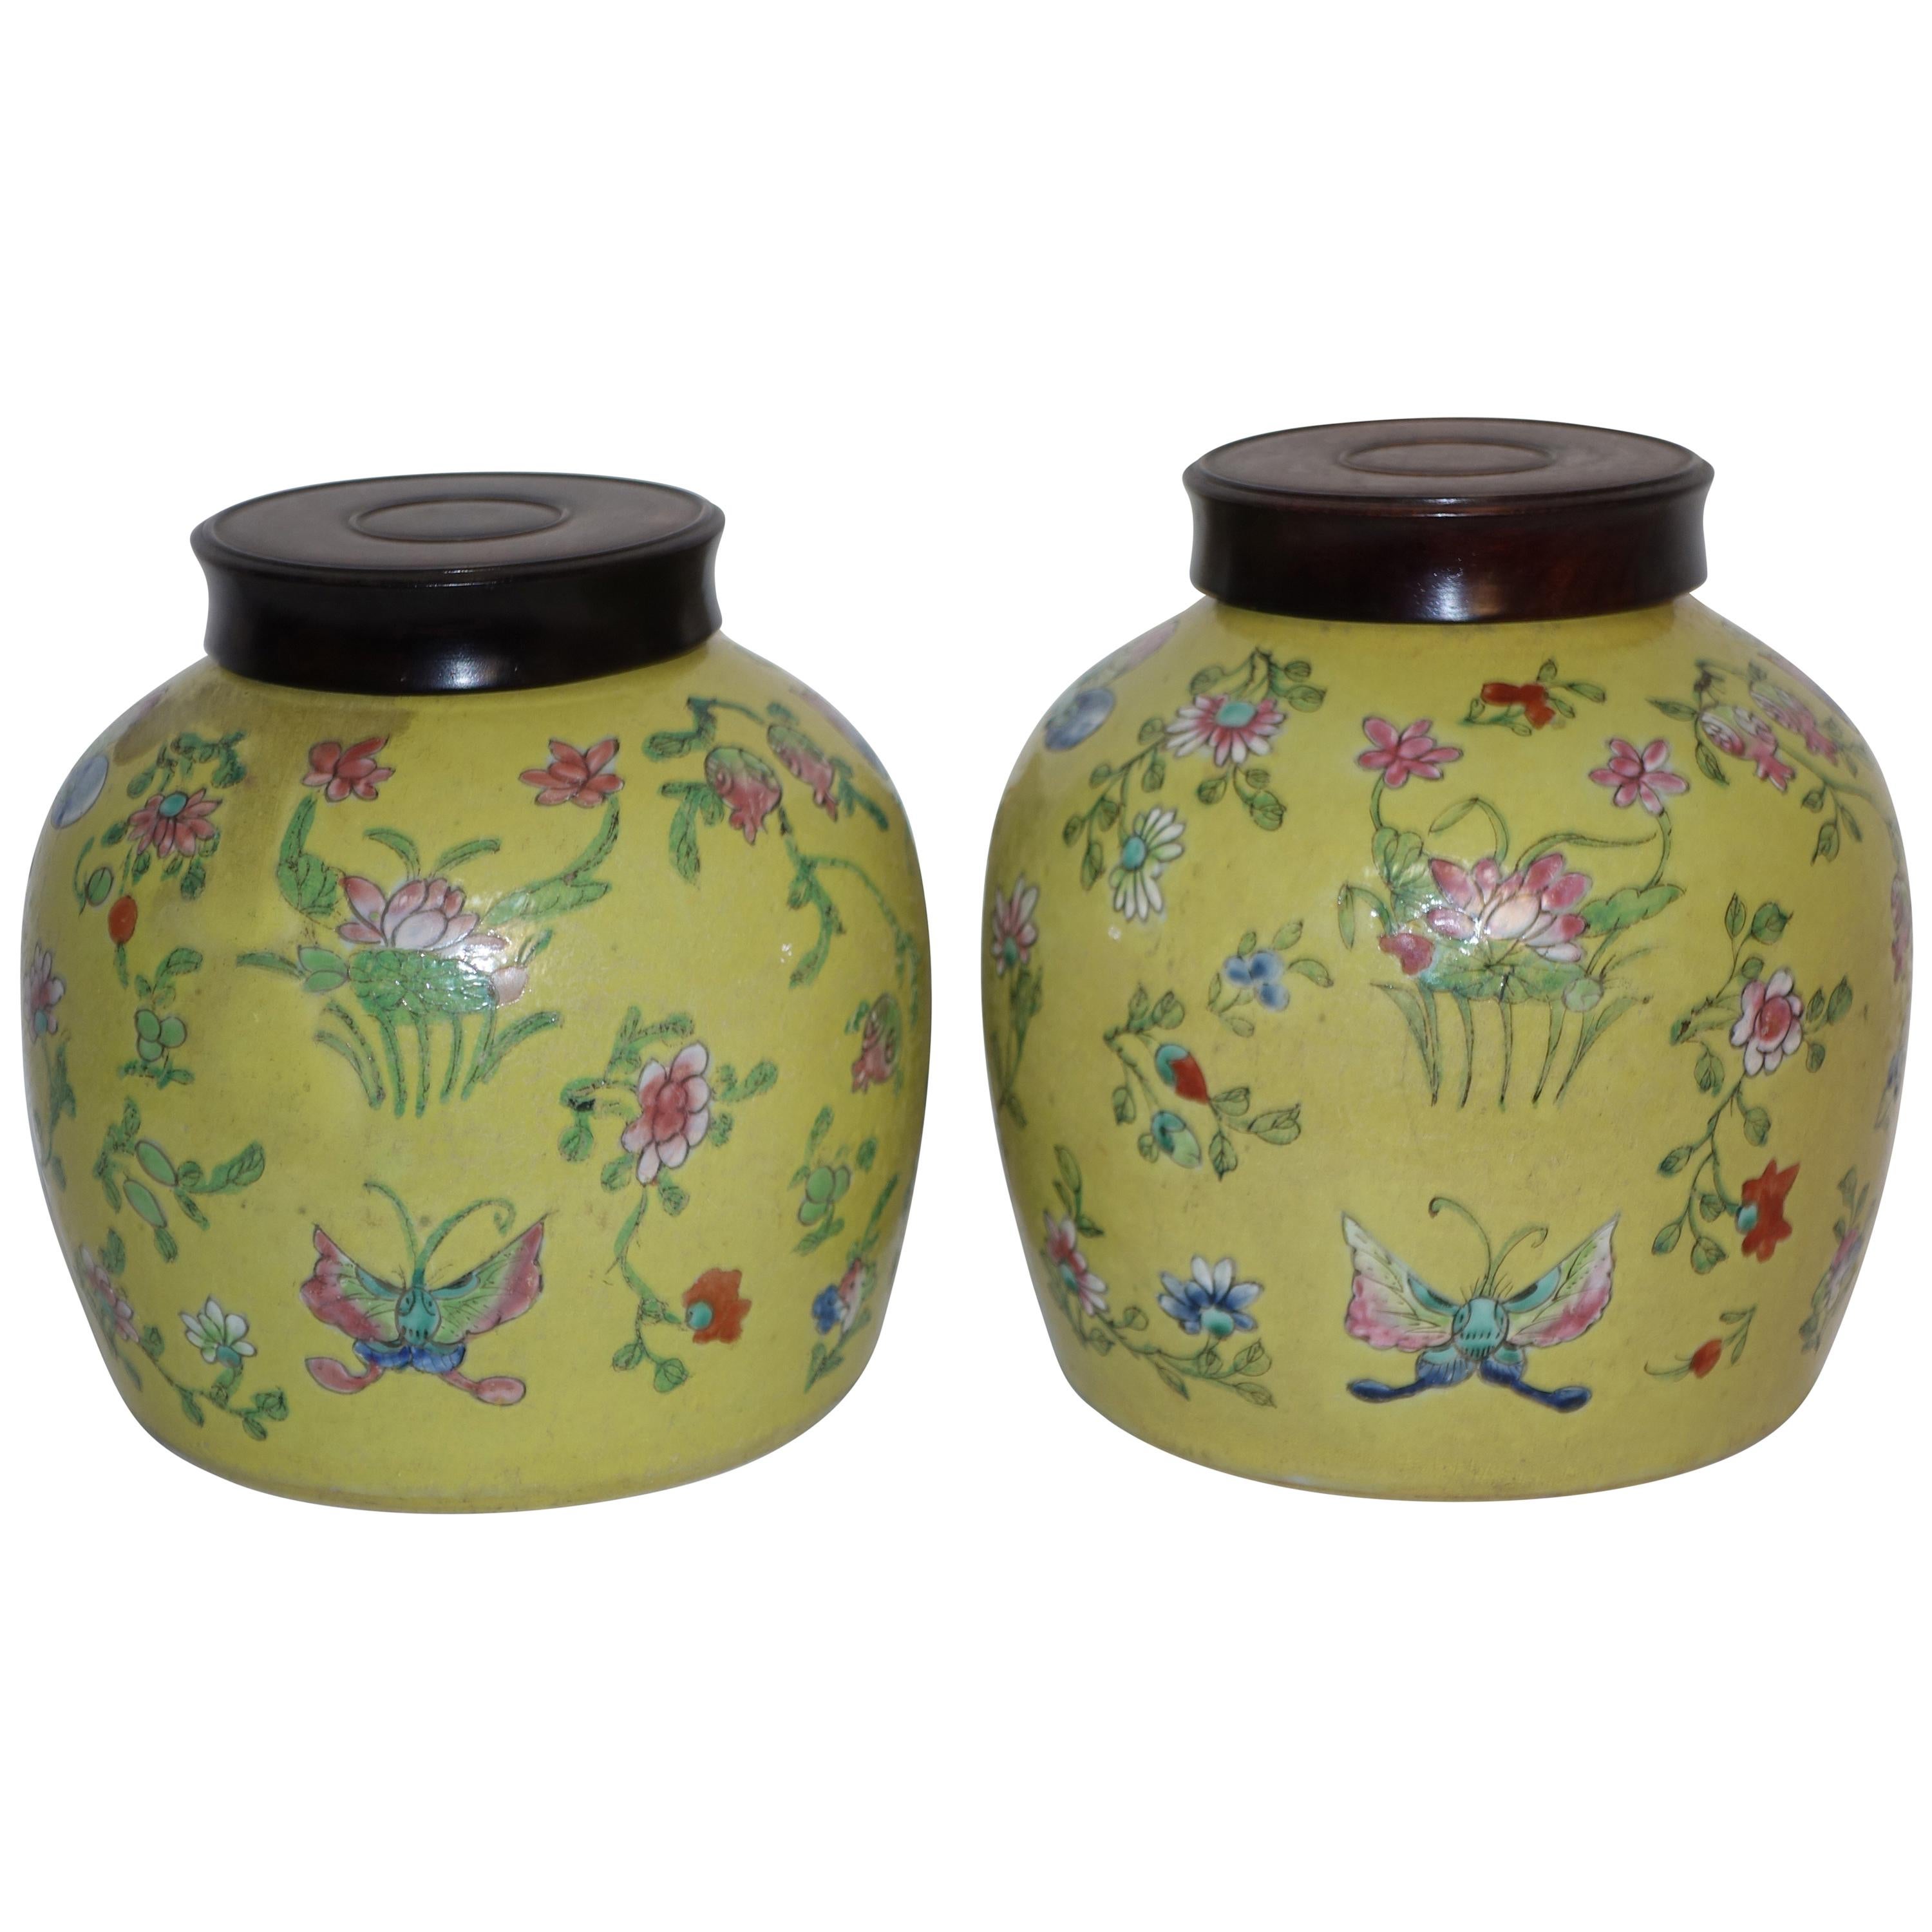 Pair of Mustard Yellow Jars with Wooden Lids, Chinese, Early 20th Century